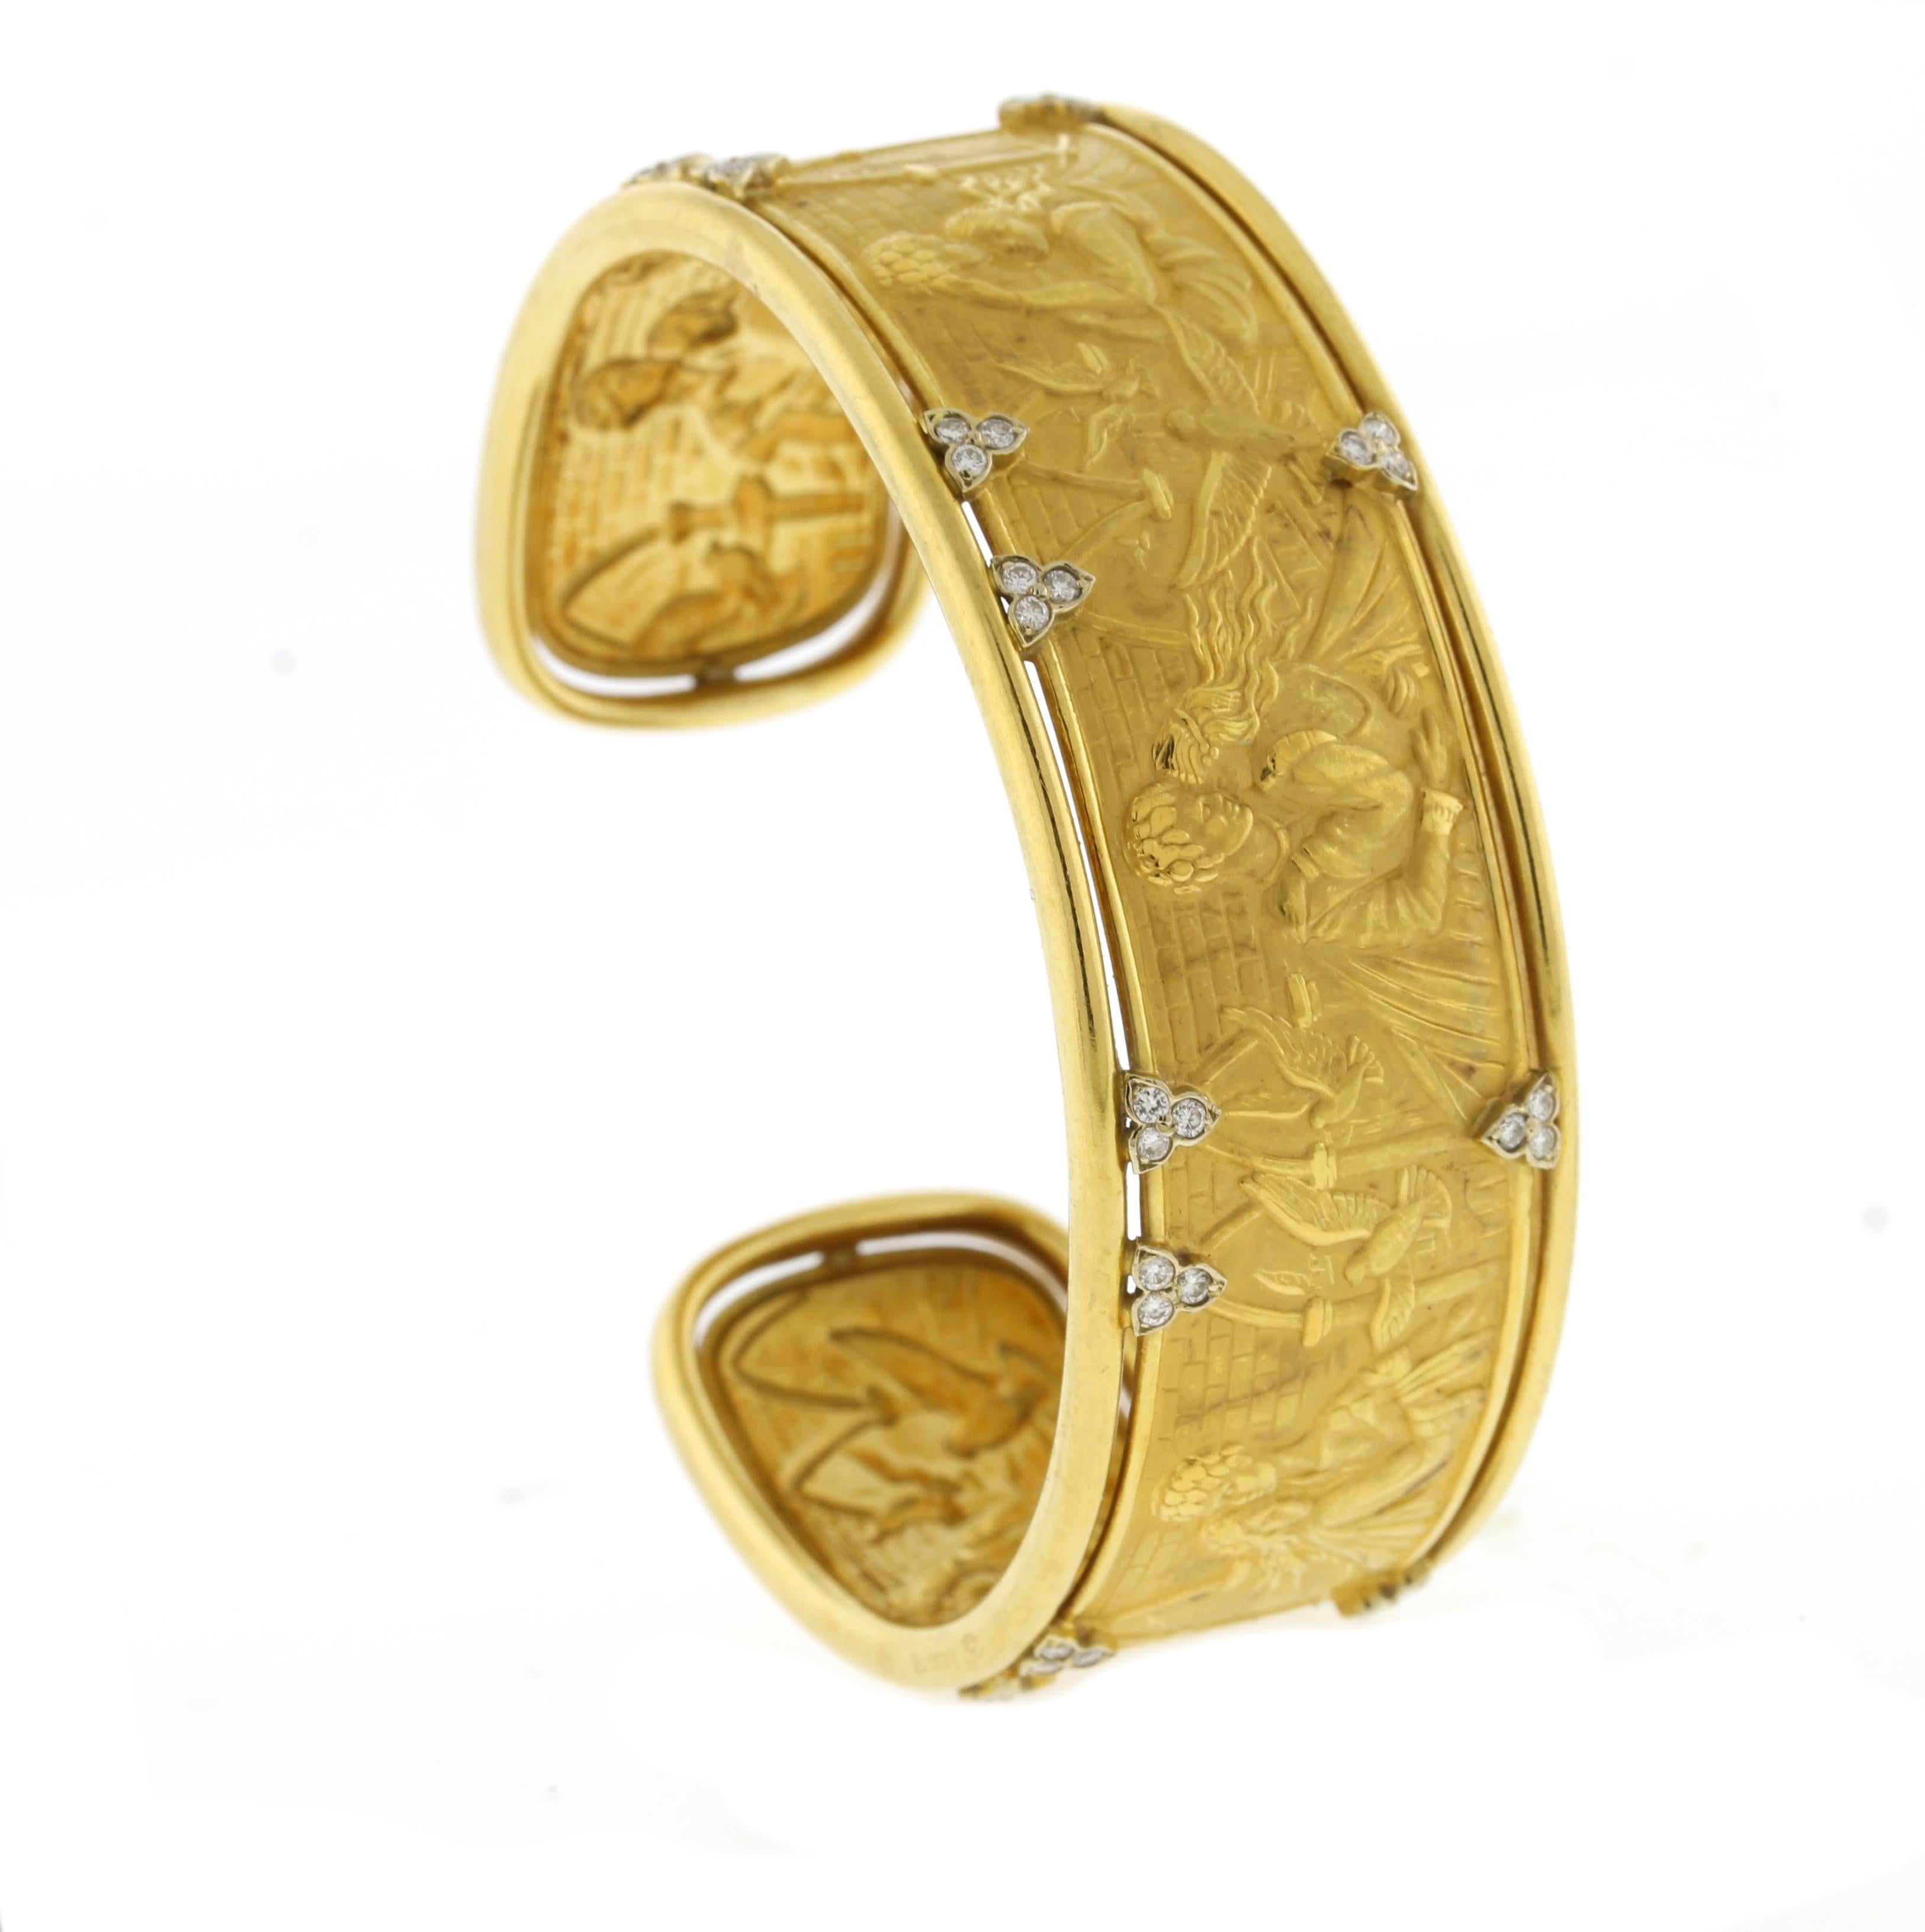 Carrera Y Carrera has built its its famous name on figurative designs, an obsession with surface finishes, and a compelling way of seeing beauty in art and nature. This 18 karat yellow gold cuff bracelet is the perfect example of Carrera's iconic